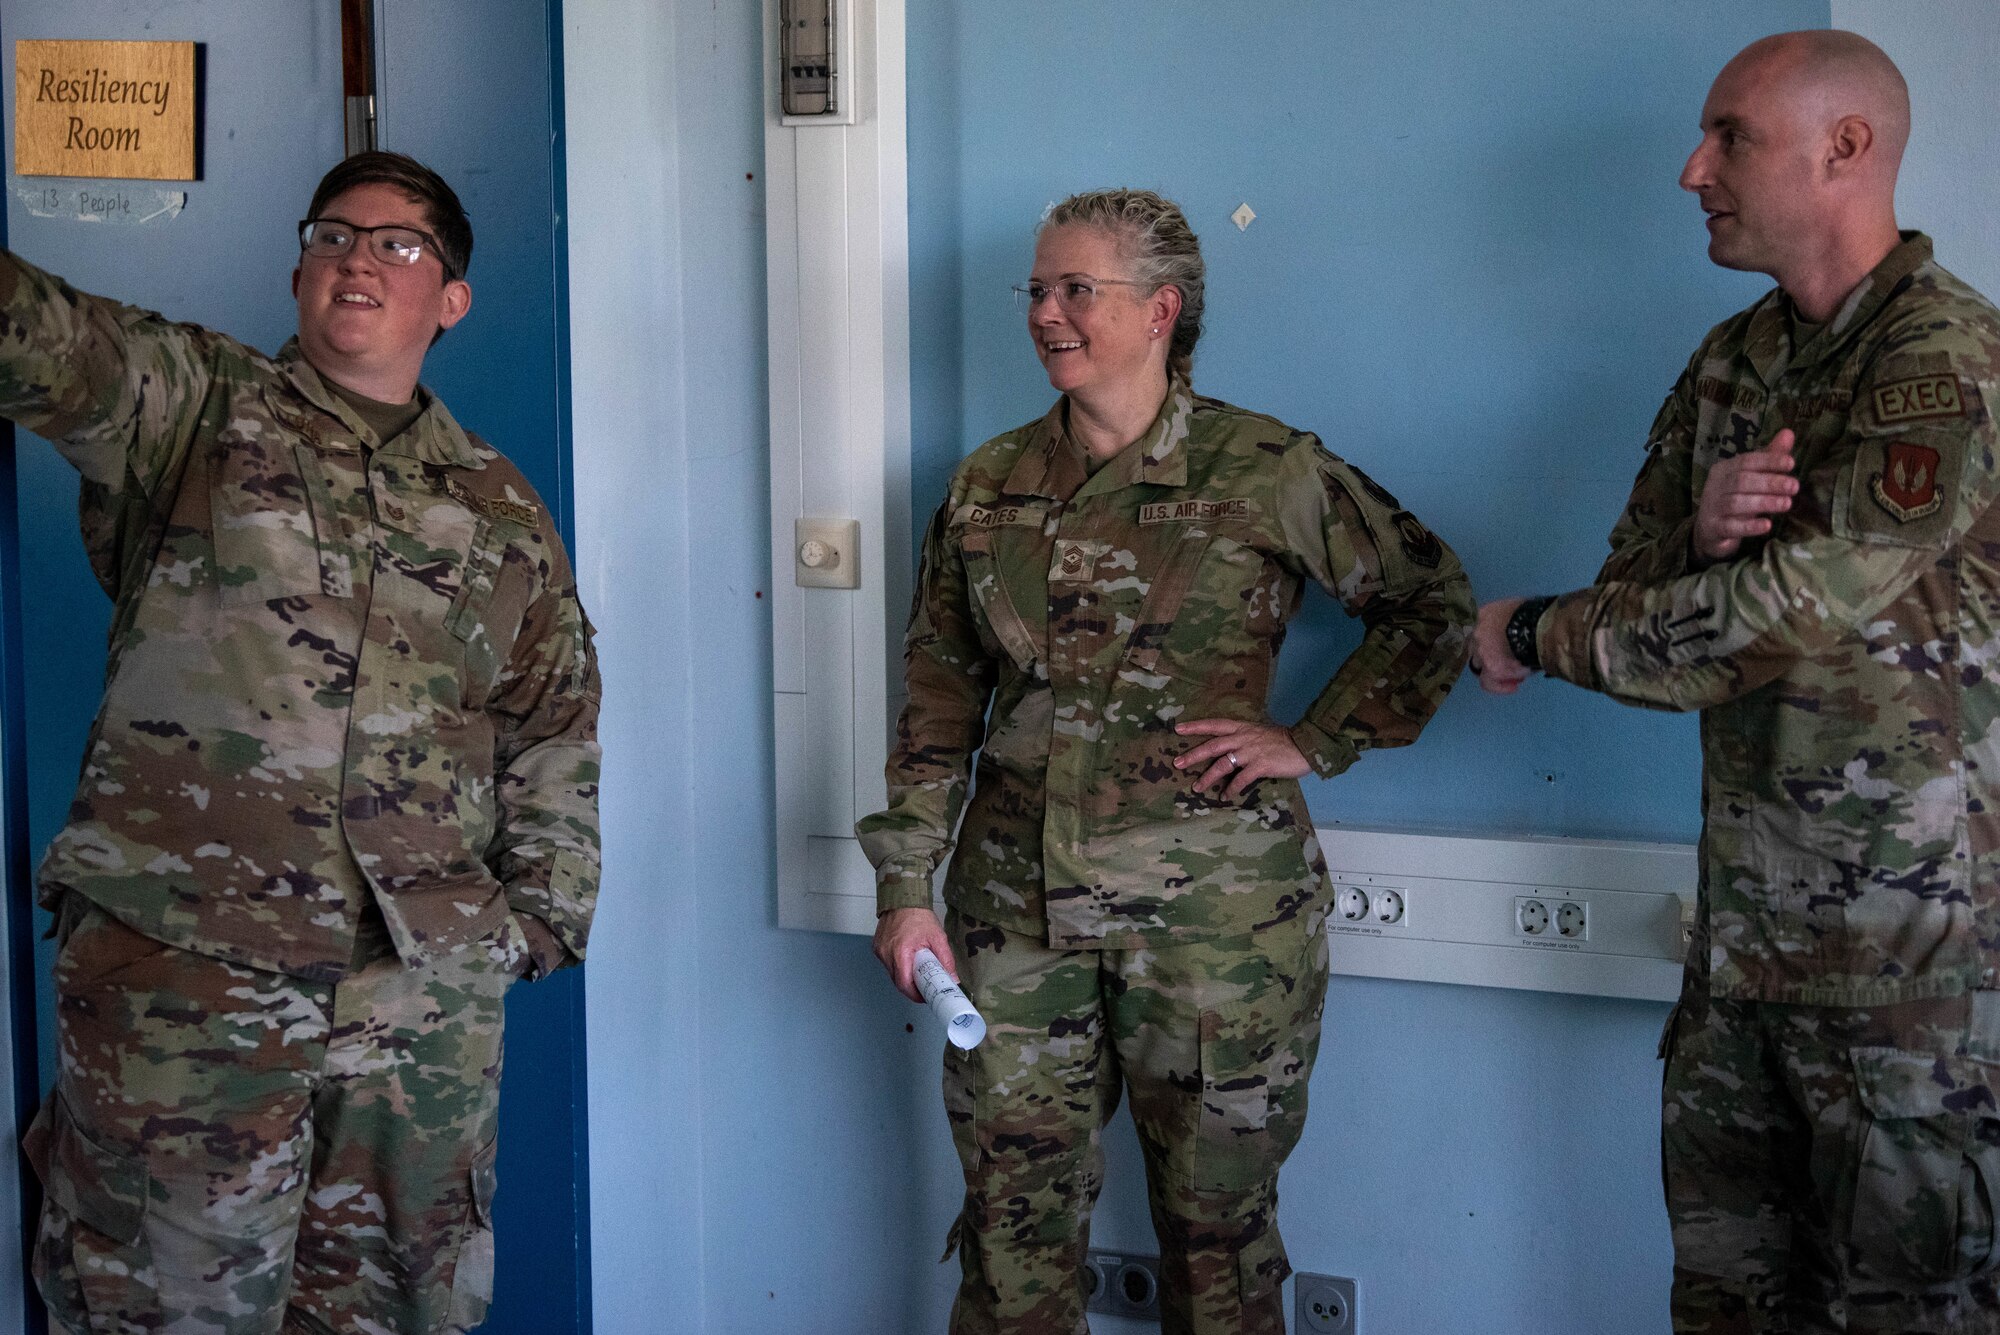 U.S. Air Force Chief Master Sgt. Stephanie Cates, Third Air Force command chief, visits a newly established “resiliency room”